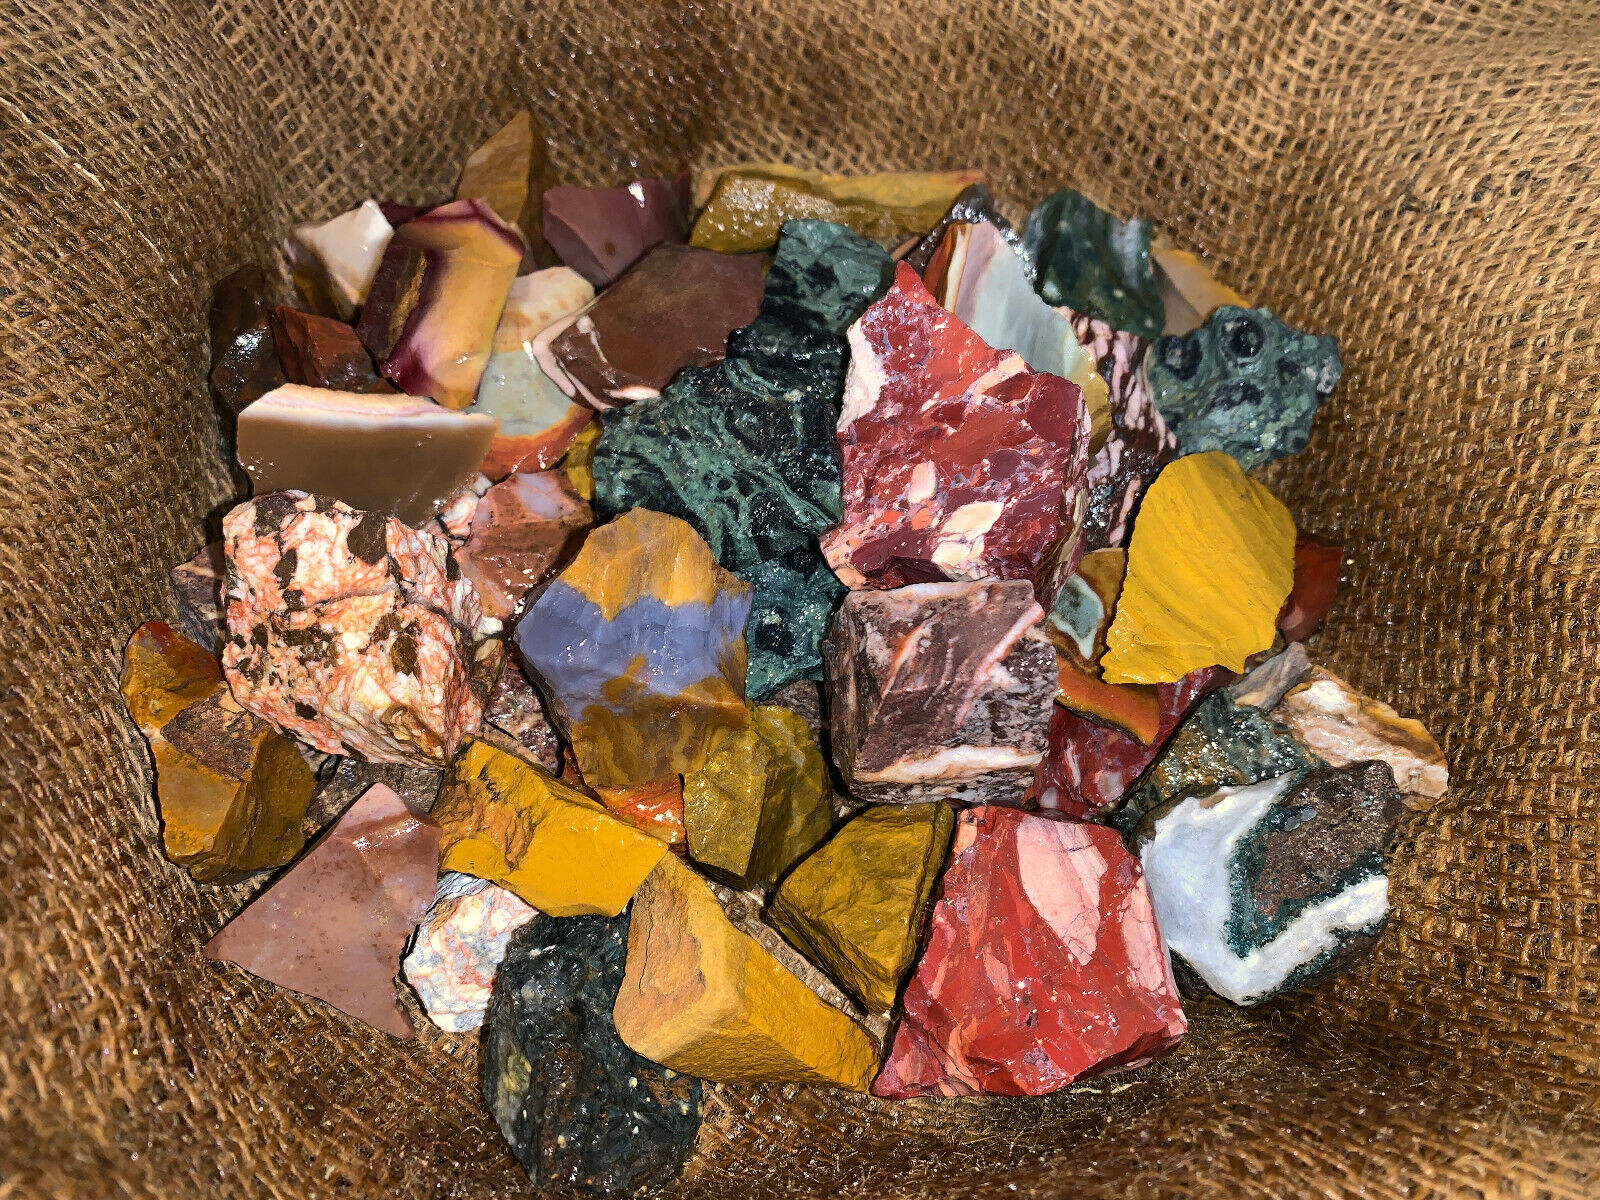 500 Carat Lots of Mixed Jasper Rough - Plus a FREE Faceted Gemstone